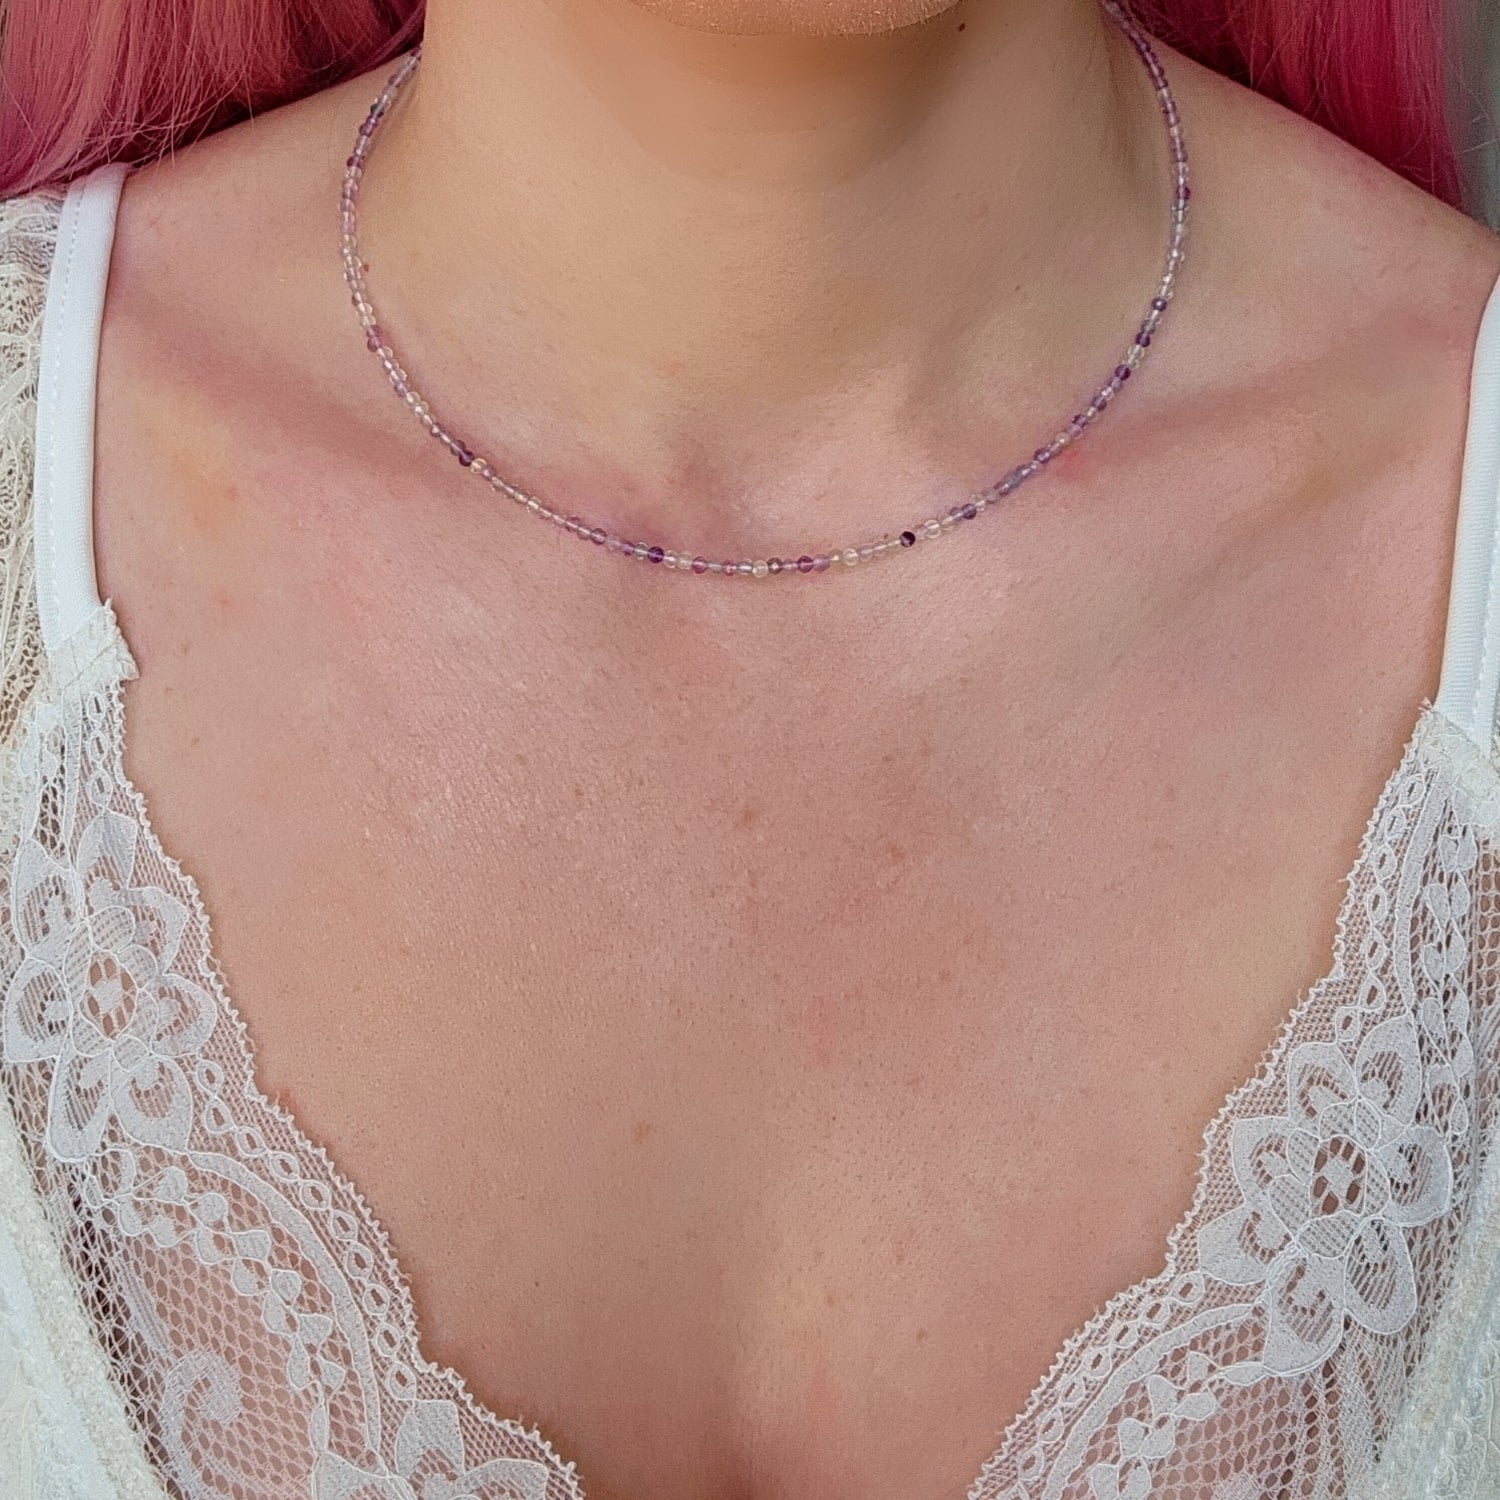 Rainbow Fluorite Micro Faceted Choker/Layering Necklace for Clarity, Focus and Memorization